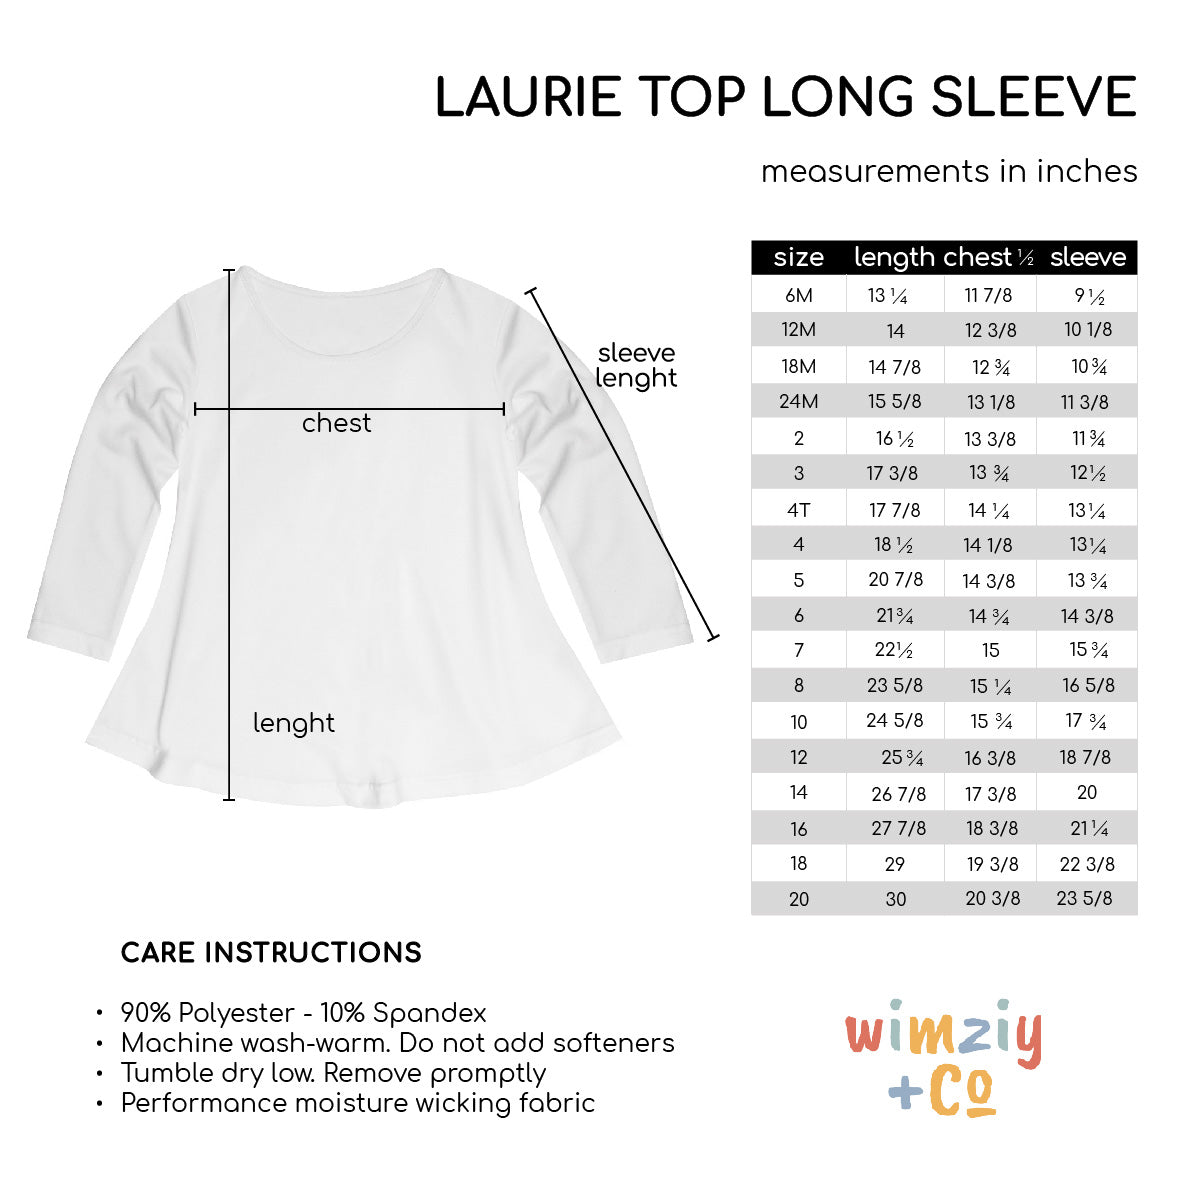 Cow White Long Sleeve Laurie Top - Wimziy&Co.